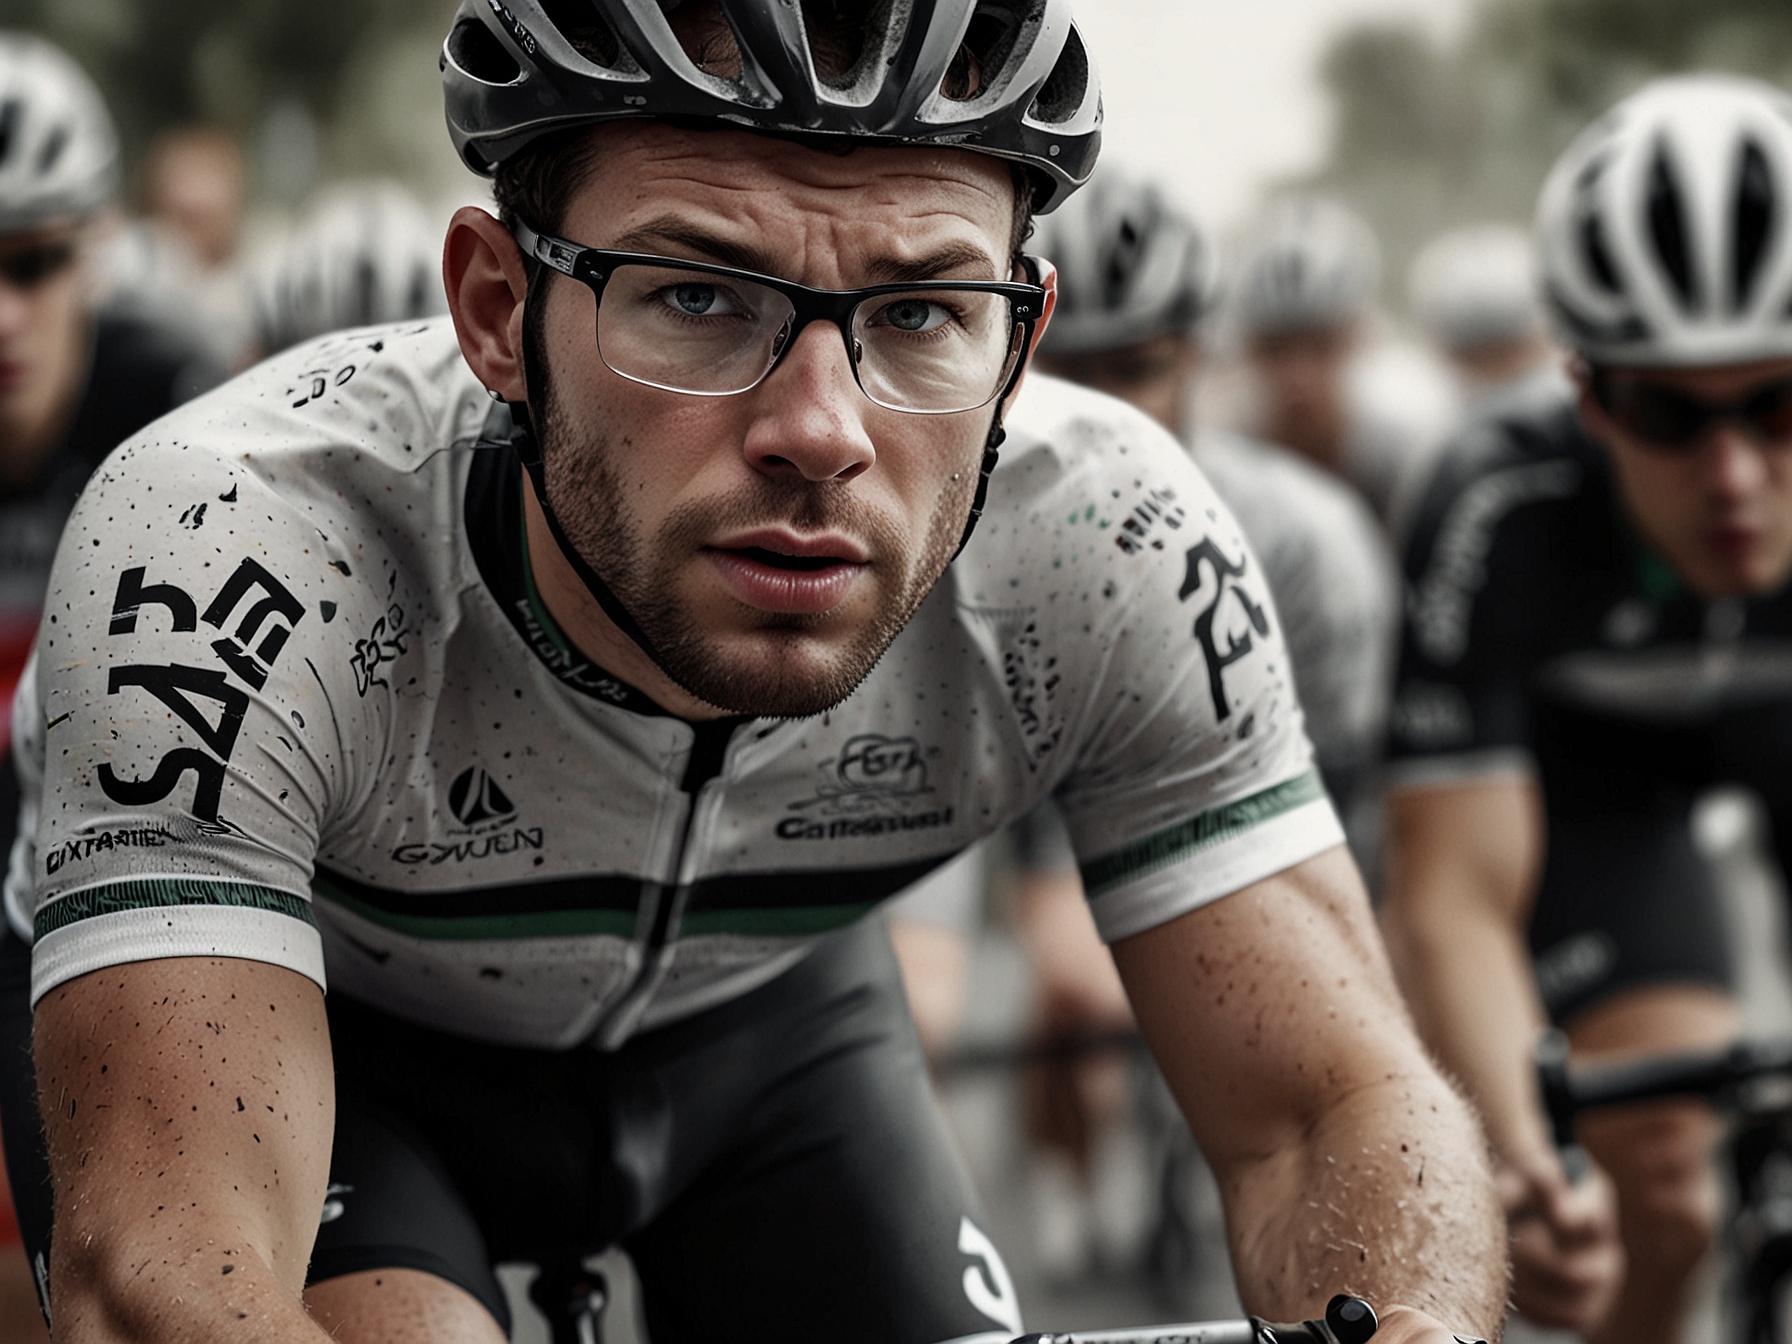 A close-up of Mark Cavendish in a cycling race, demonstrating intense focus and determination. His teammates ride closely behind, poised to support him in a forthcoming sprint finish.